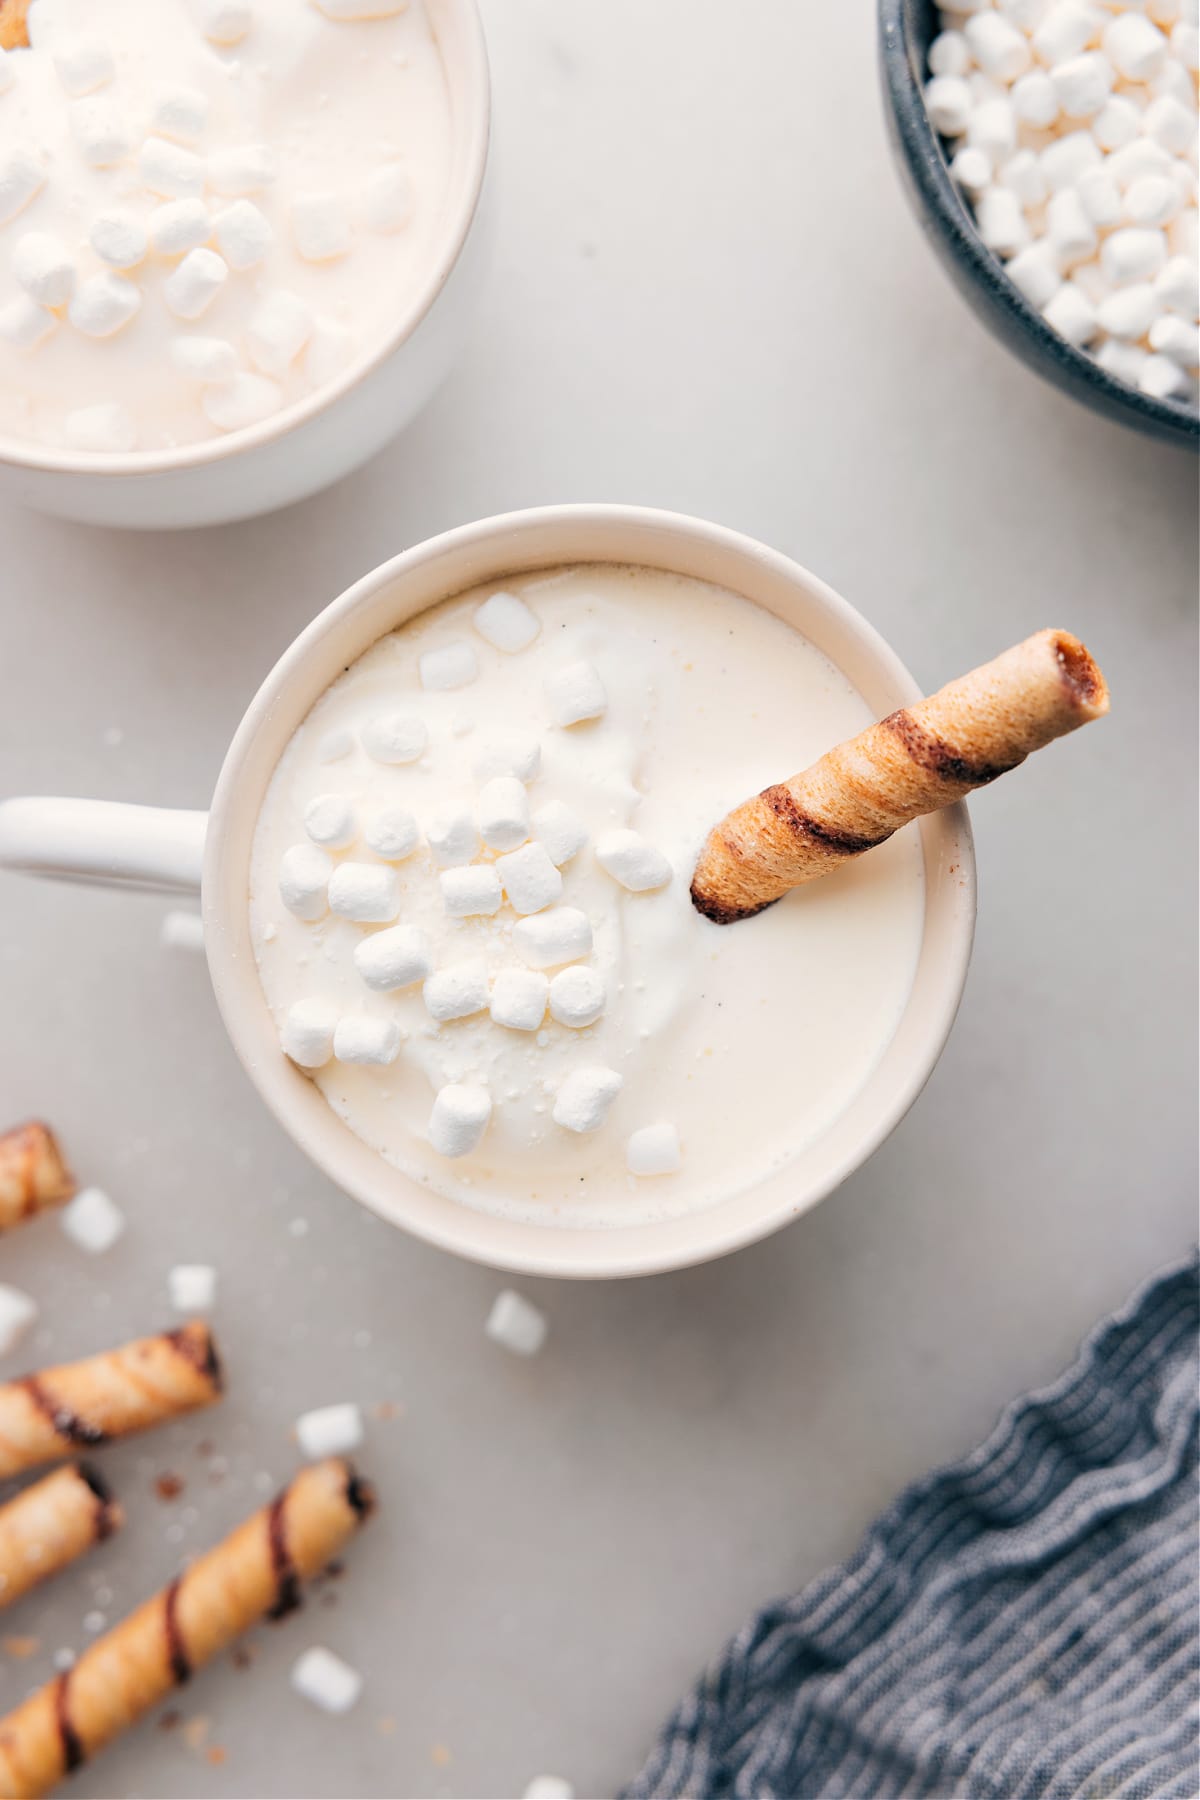 A mug of warm and delicious White Hot Chocolate, with marshmallows floating on top and a chocolate straw coming out of it.